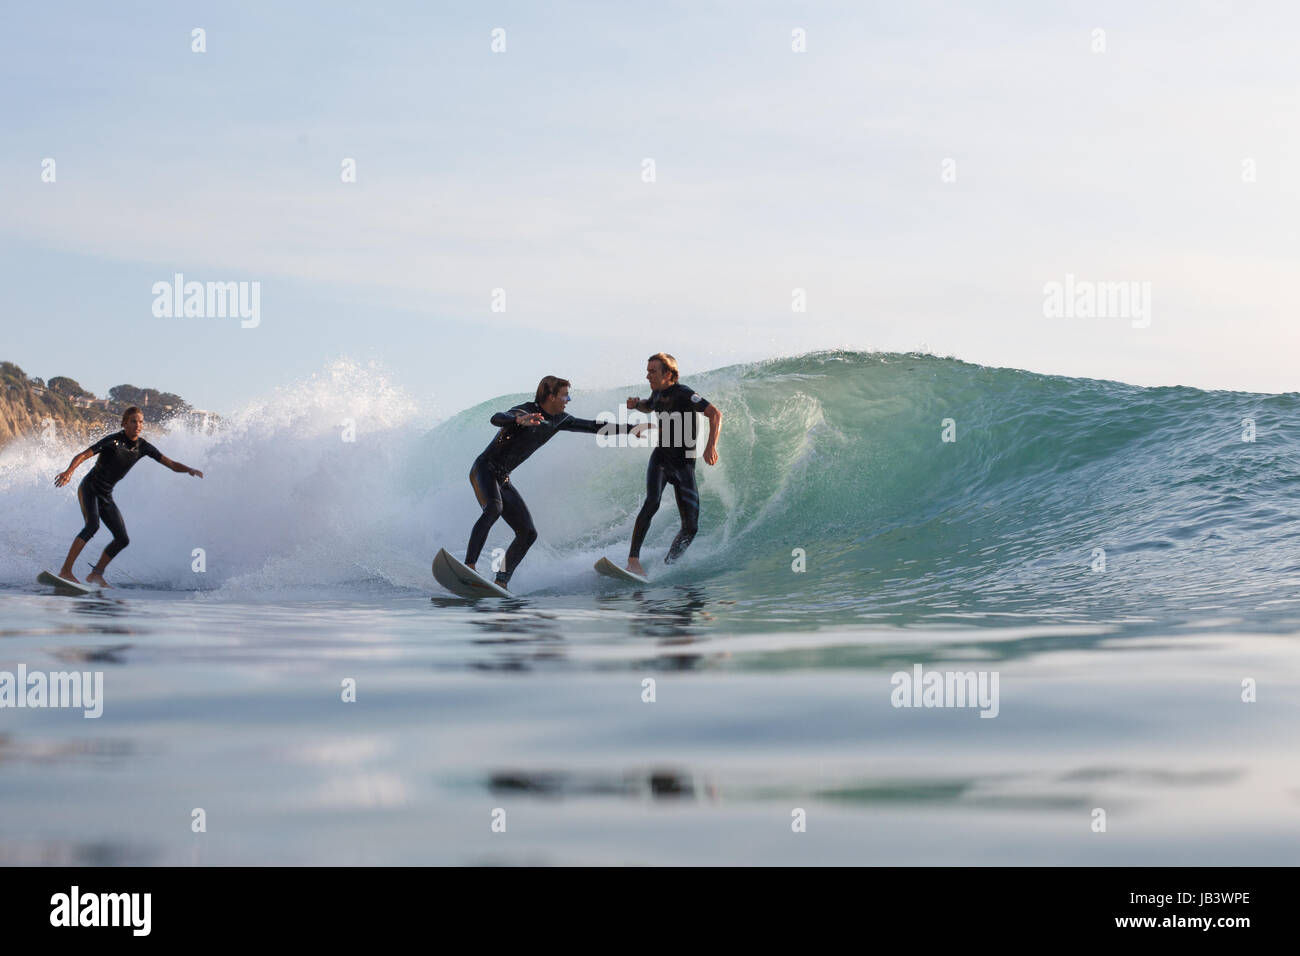 Overcrowded waves in Southern California lead two surfers to engage in a fistfight while surfing at Black's Beach. Stock Photo